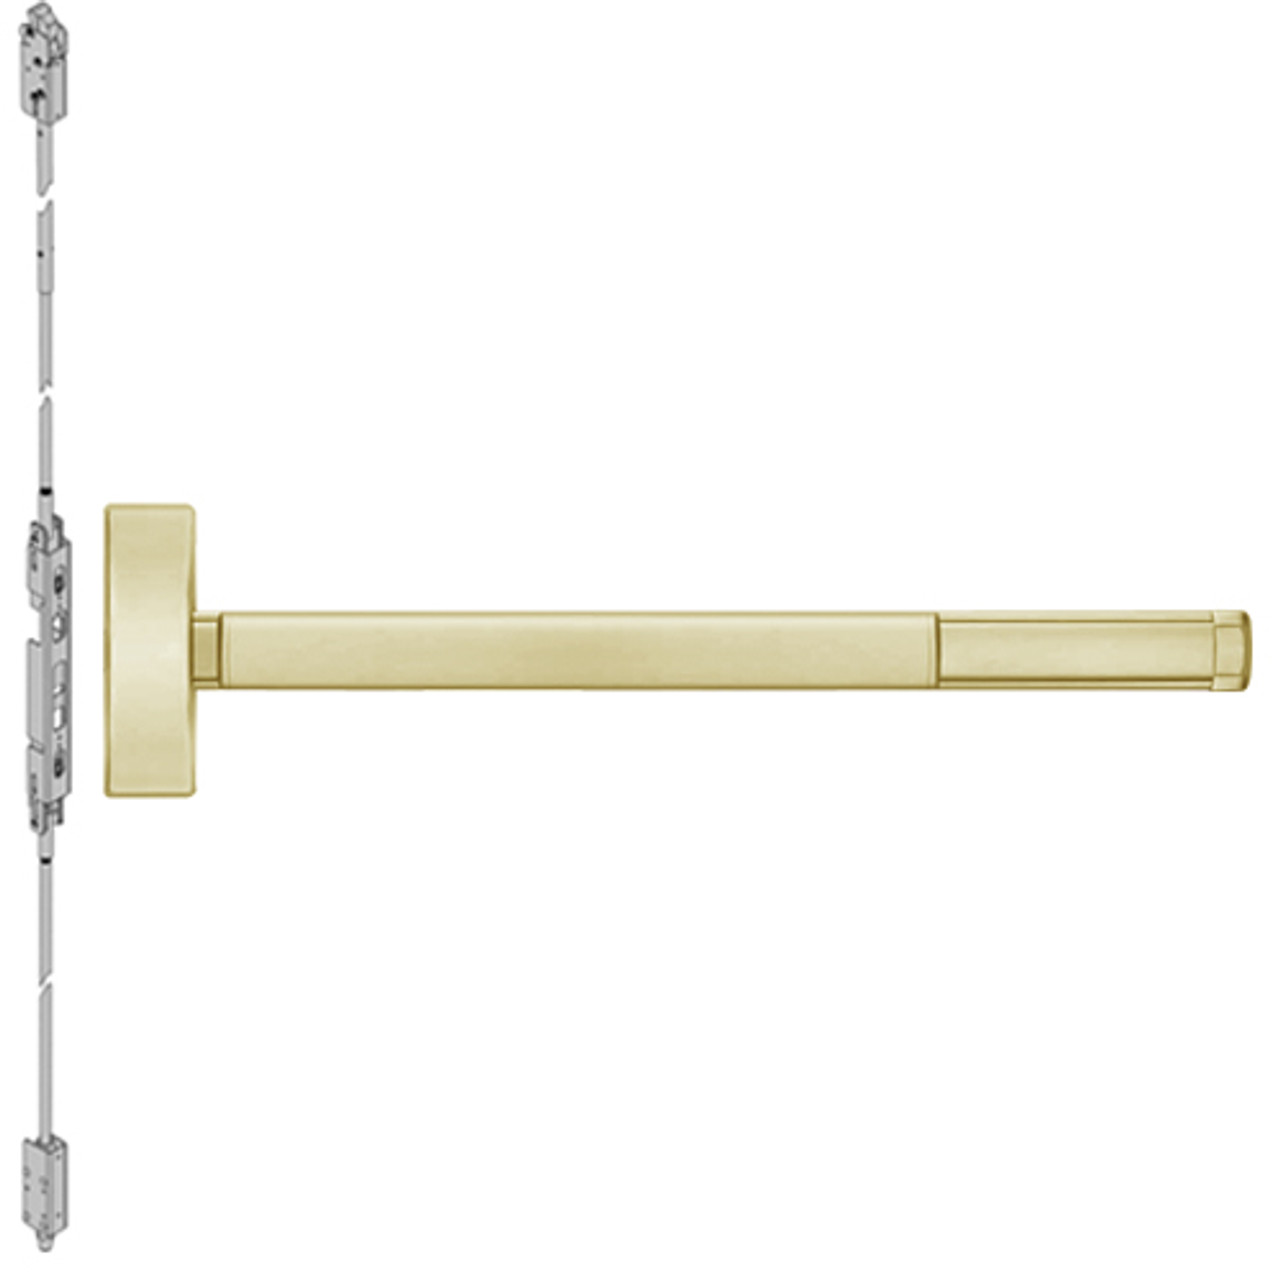 DEFL2808LBR-606-48 PHI 2800 Series Fire Rated Concealed Vertical Rod Exit Device with Delayed Egress Prepped for Key Controls Lever-Knob in Satin Brass Finish